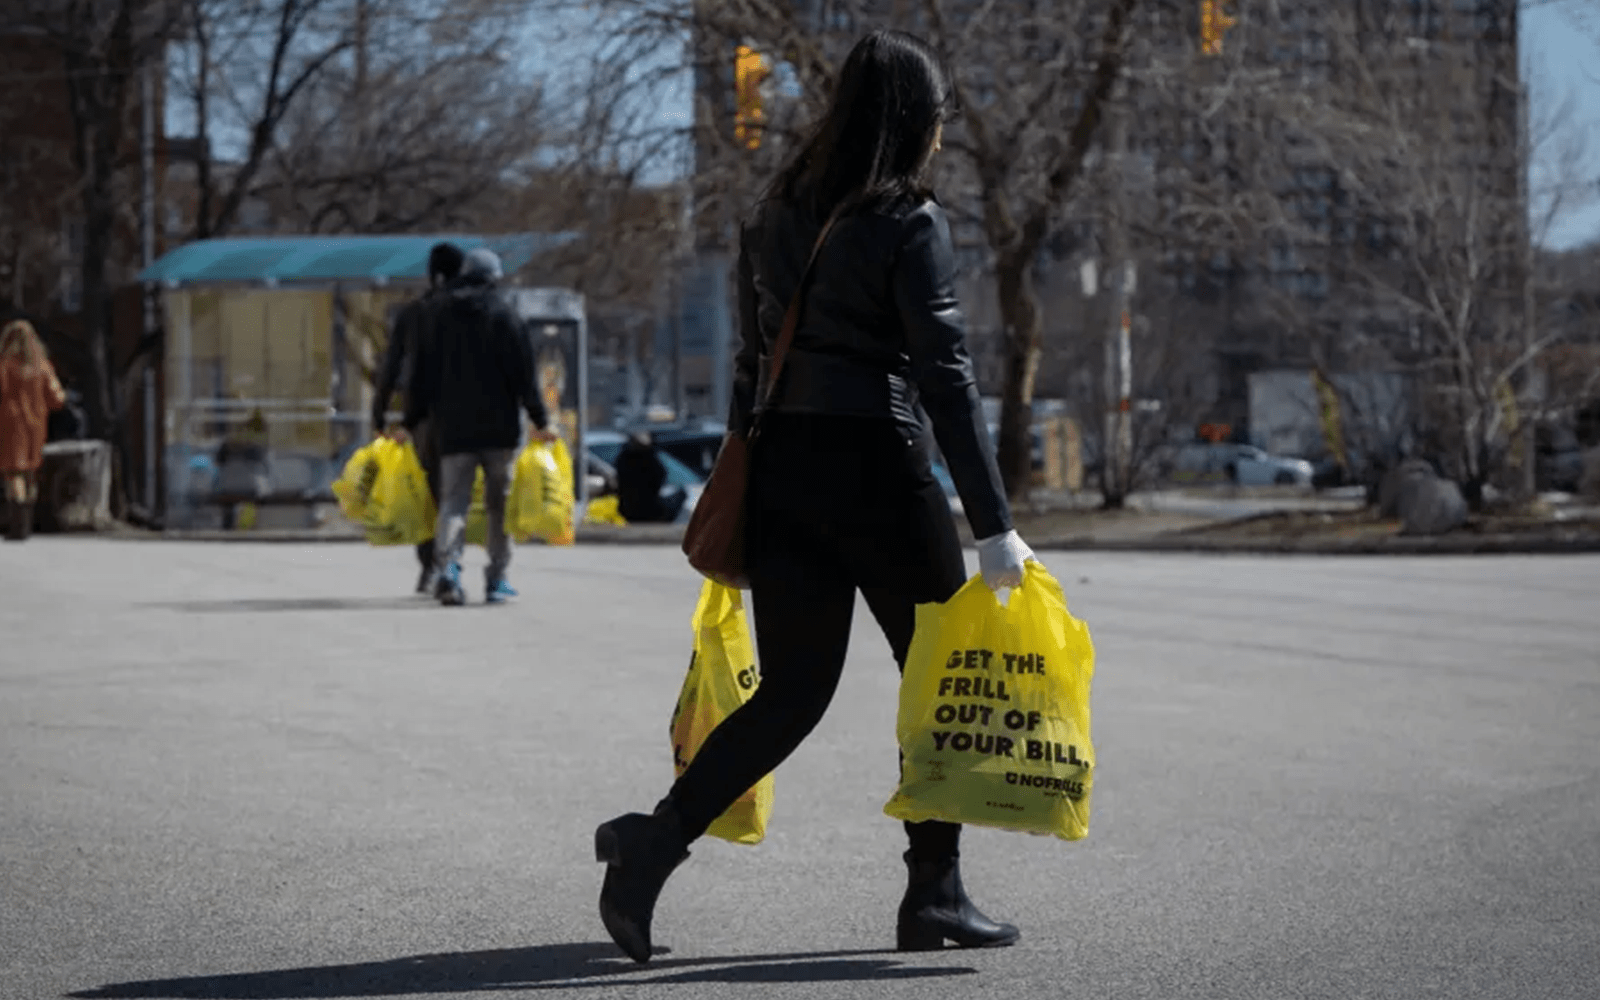 A woman is walking outdoors with two yellow grocery bags.